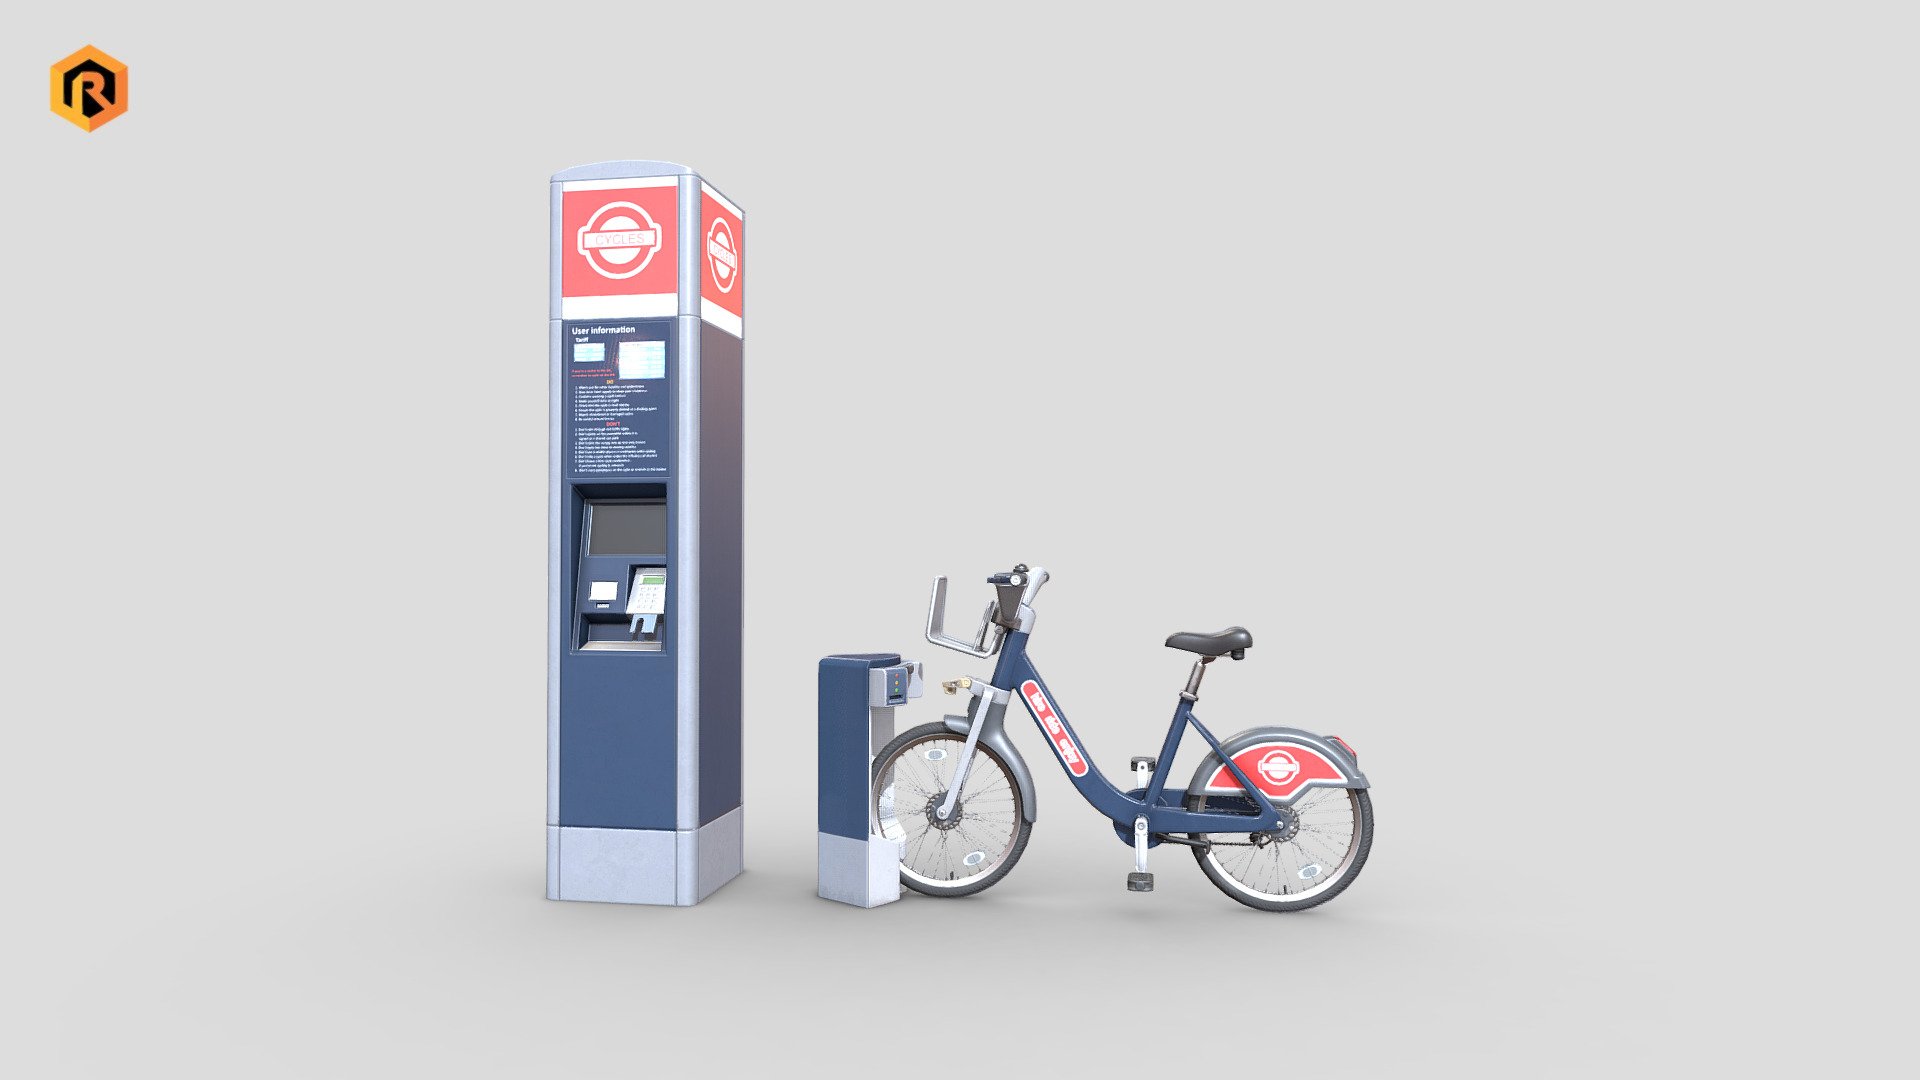 High-quality low-poly PBR 3D models of a Public Bicycle hire scheme.

The collection includes 3 models: Public Cycle, Docking Station and The Terminal.
These vehicles are widely used form of urban transport in a lot of cities.

Many bike share systems allow people to borrow a bike from a &ldquo;dock